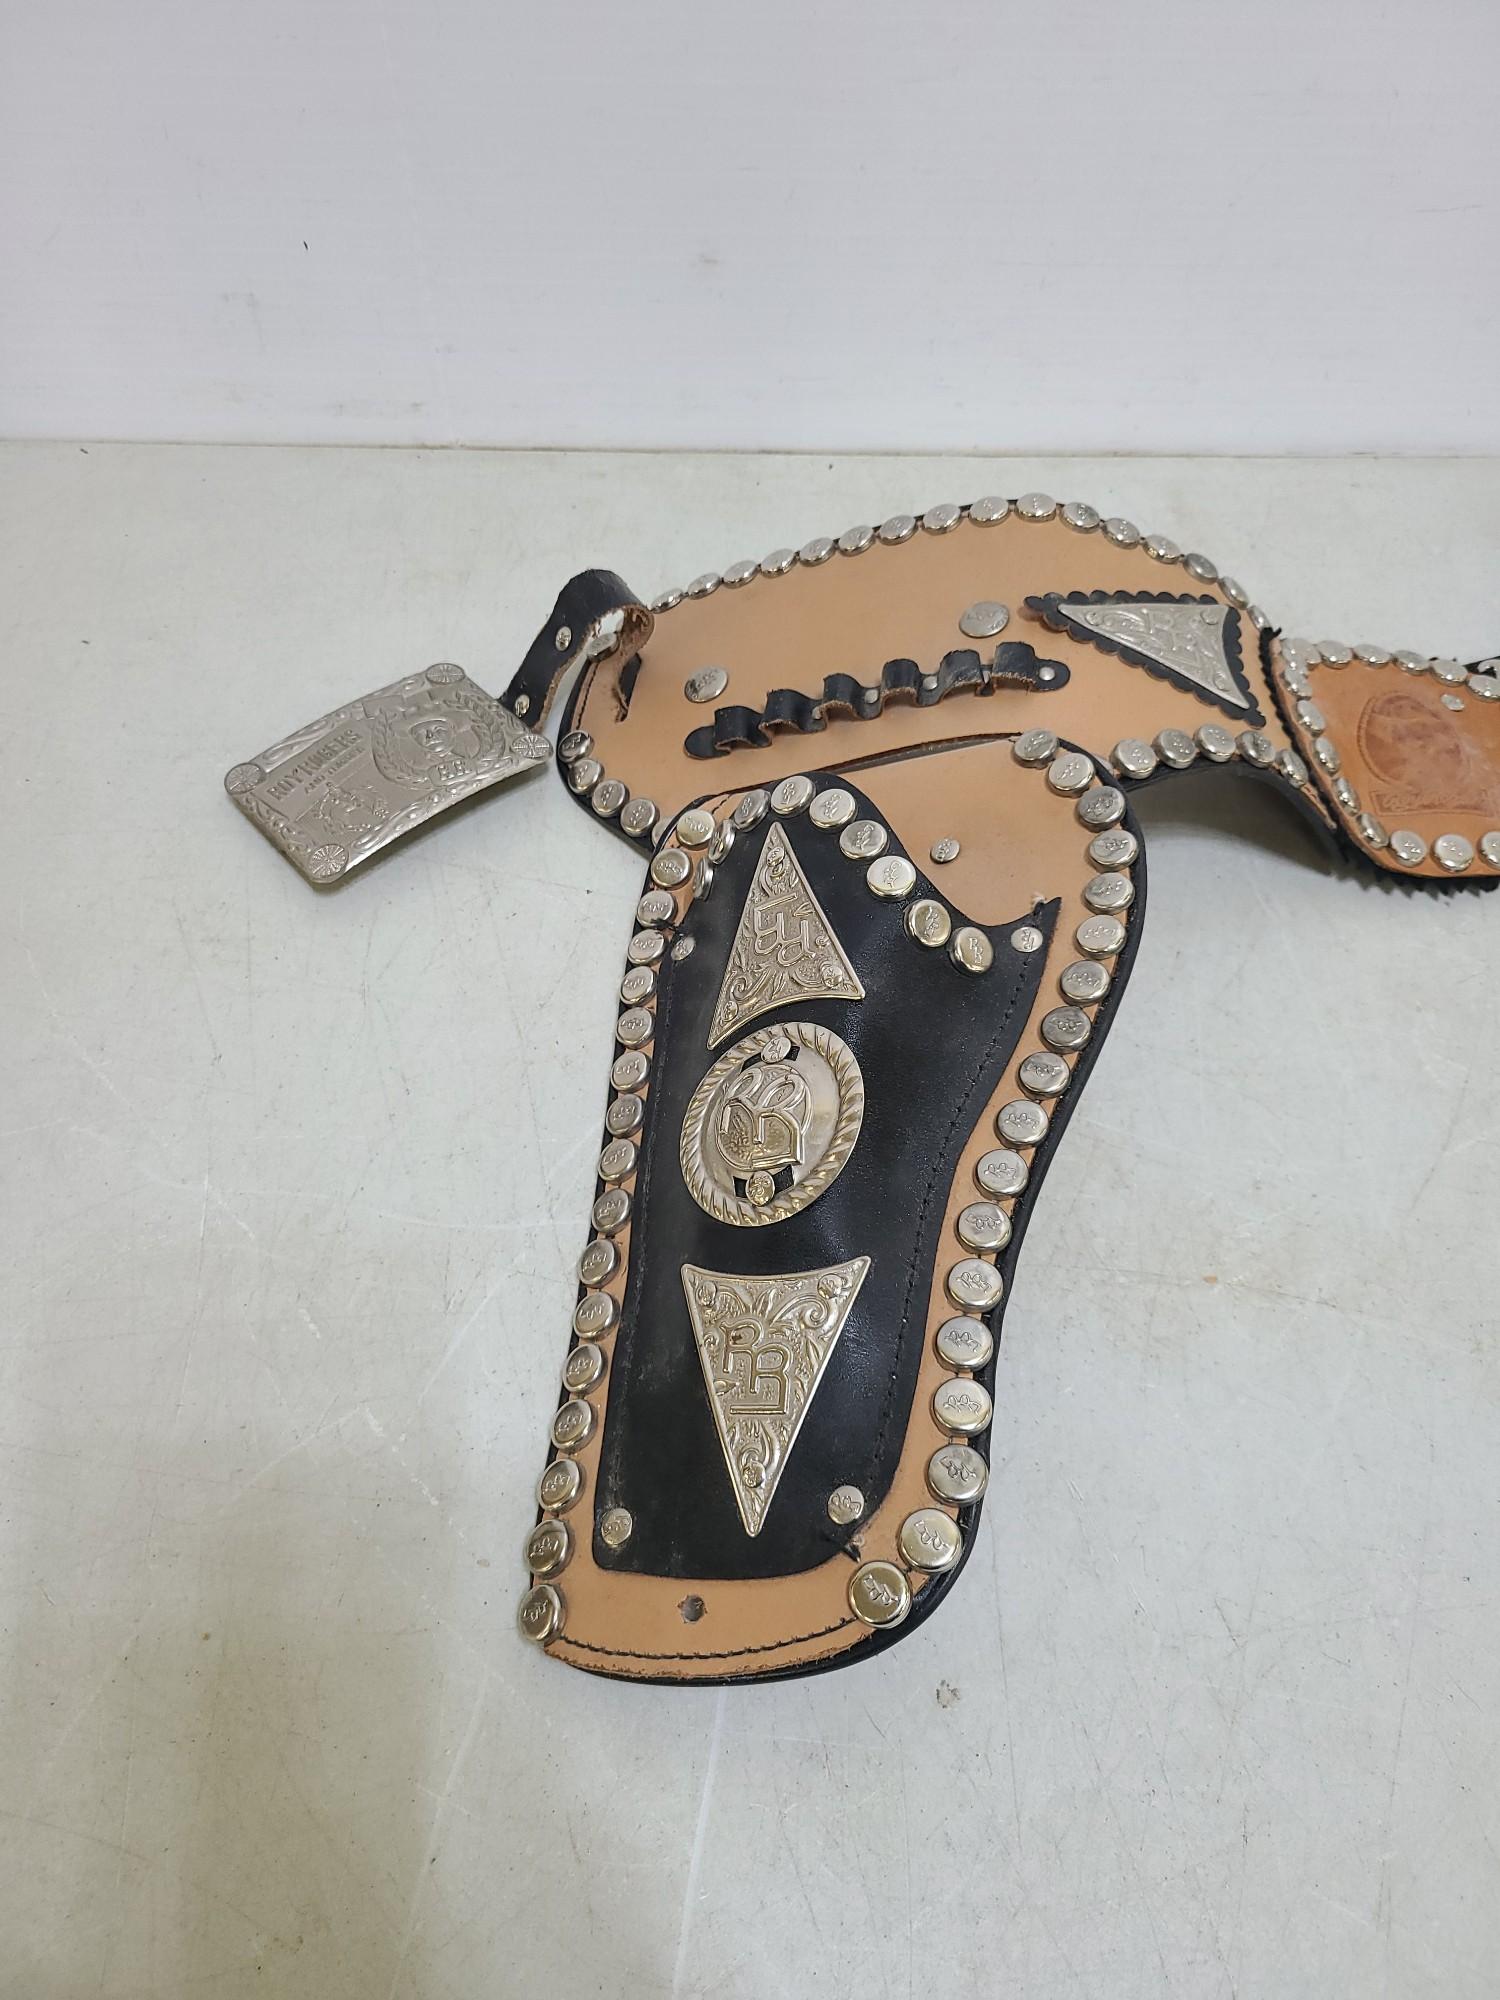 Roy Rogers Leather Holster and Toy Cap Guns